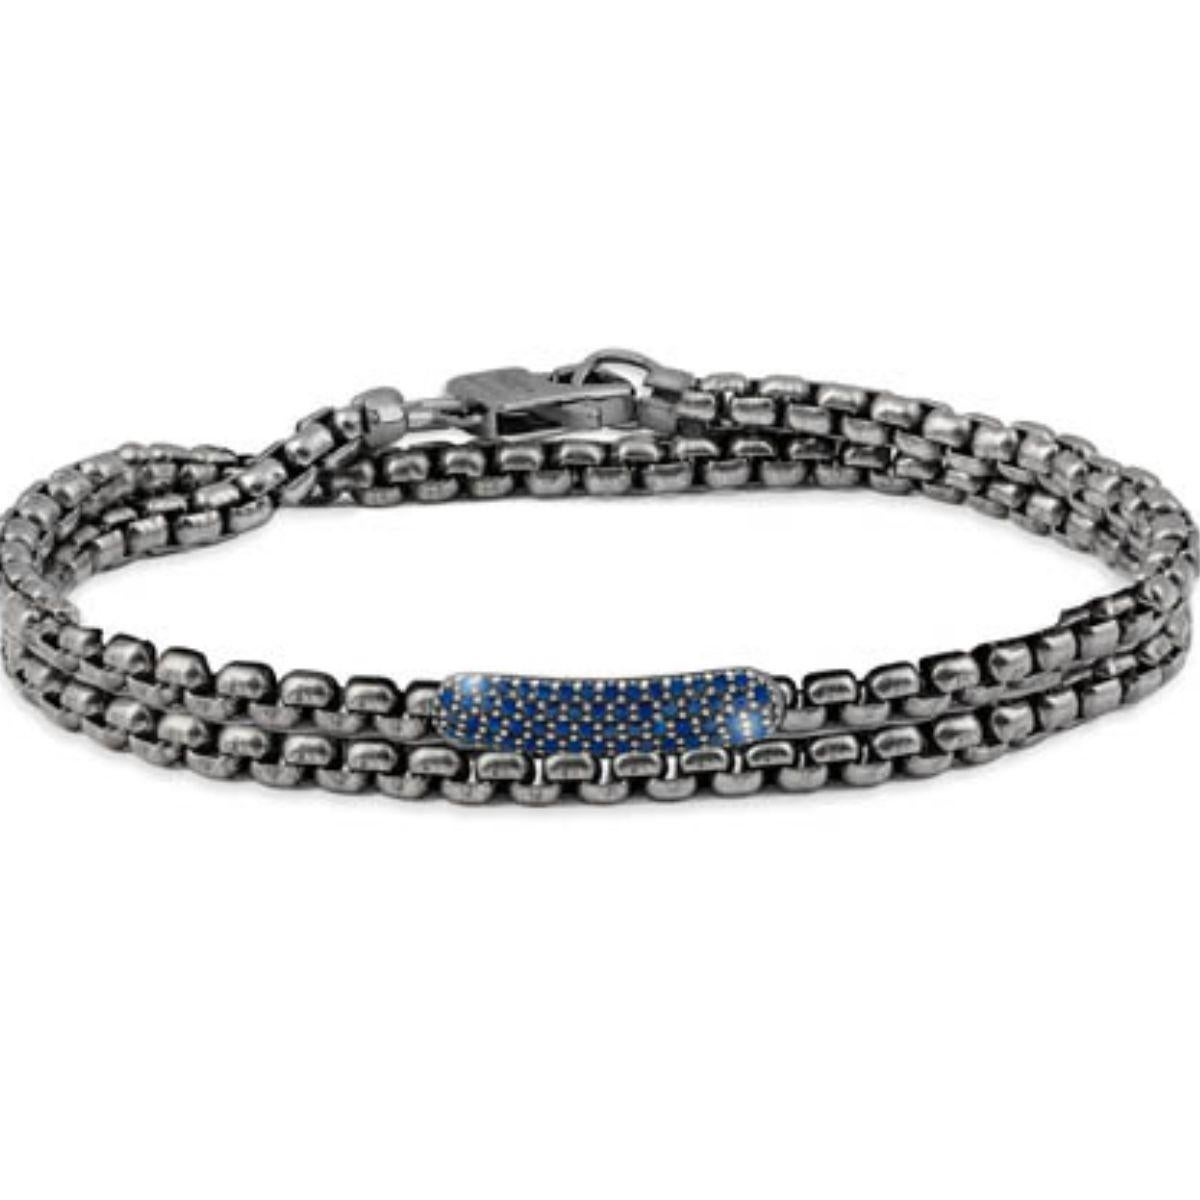 Black Rhodium Plated Sterling Silver Catena Baton Bracelet with Sapphires Size S In New Condition For Sale In Fulham business exchange, London